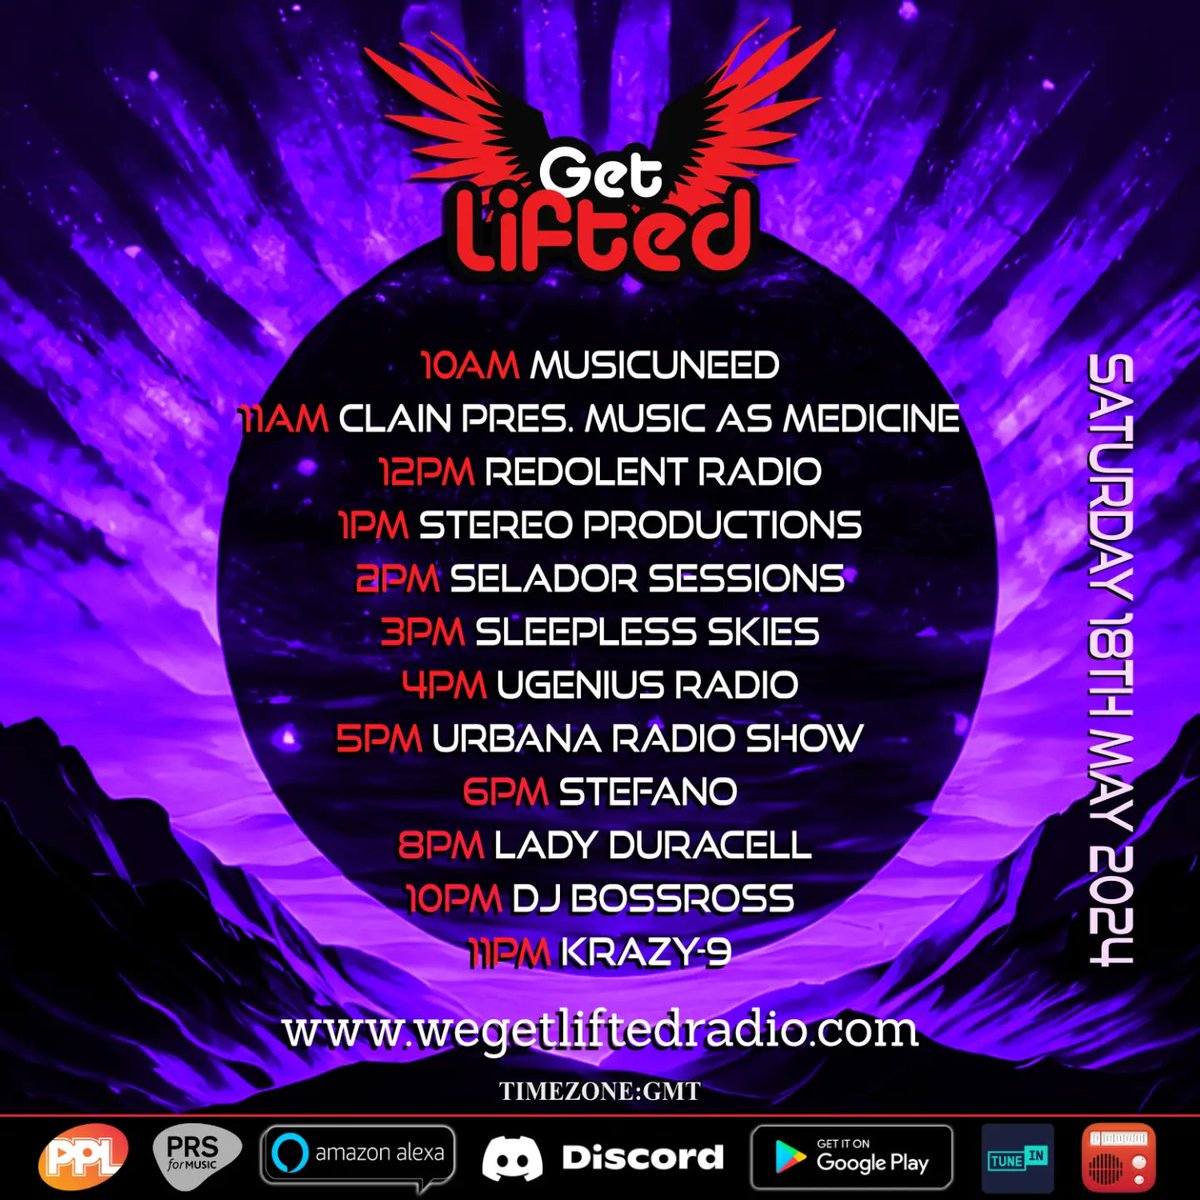 Take us with you, and listen to the best sounds 🎶
We Get Lifted Radio is on your fav apps.

wegetliftedradio.com mixcloud.com/live/wegetlift… 

#housemusic #housemusiclovers #djset 
#melodichouse #afrohouse 
#progressivehouse